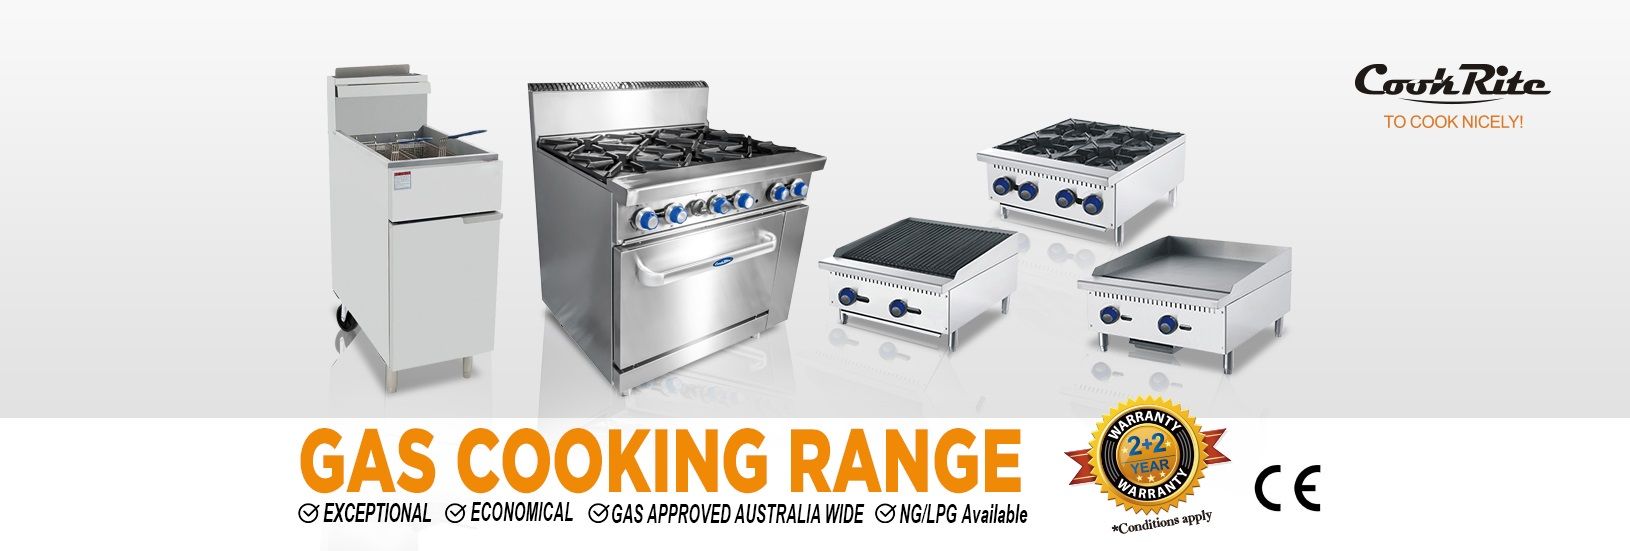 Buy our wide range of high-quality commercial kitchen